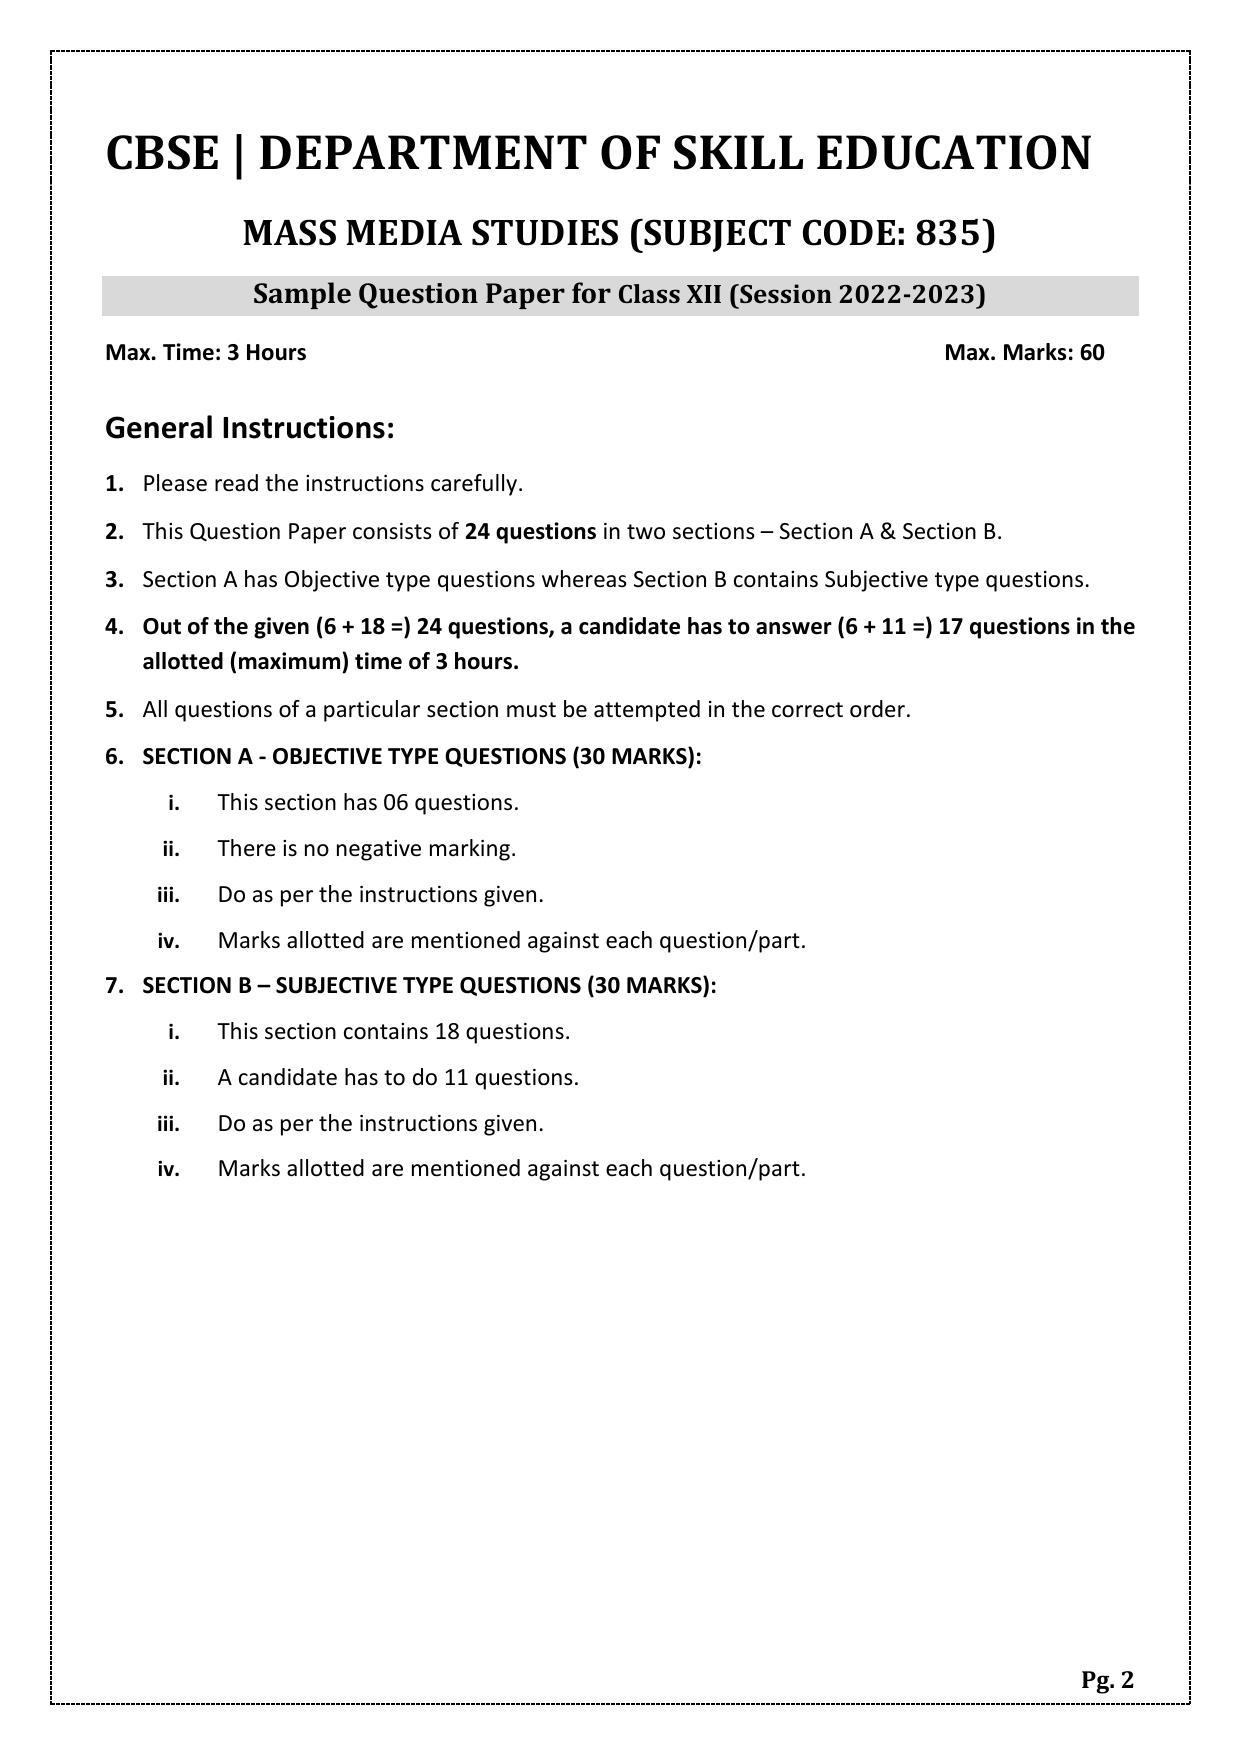 CBSE Class 10 Mass Media Studies (Skill Education) Sample Papers 2023 - Page 2